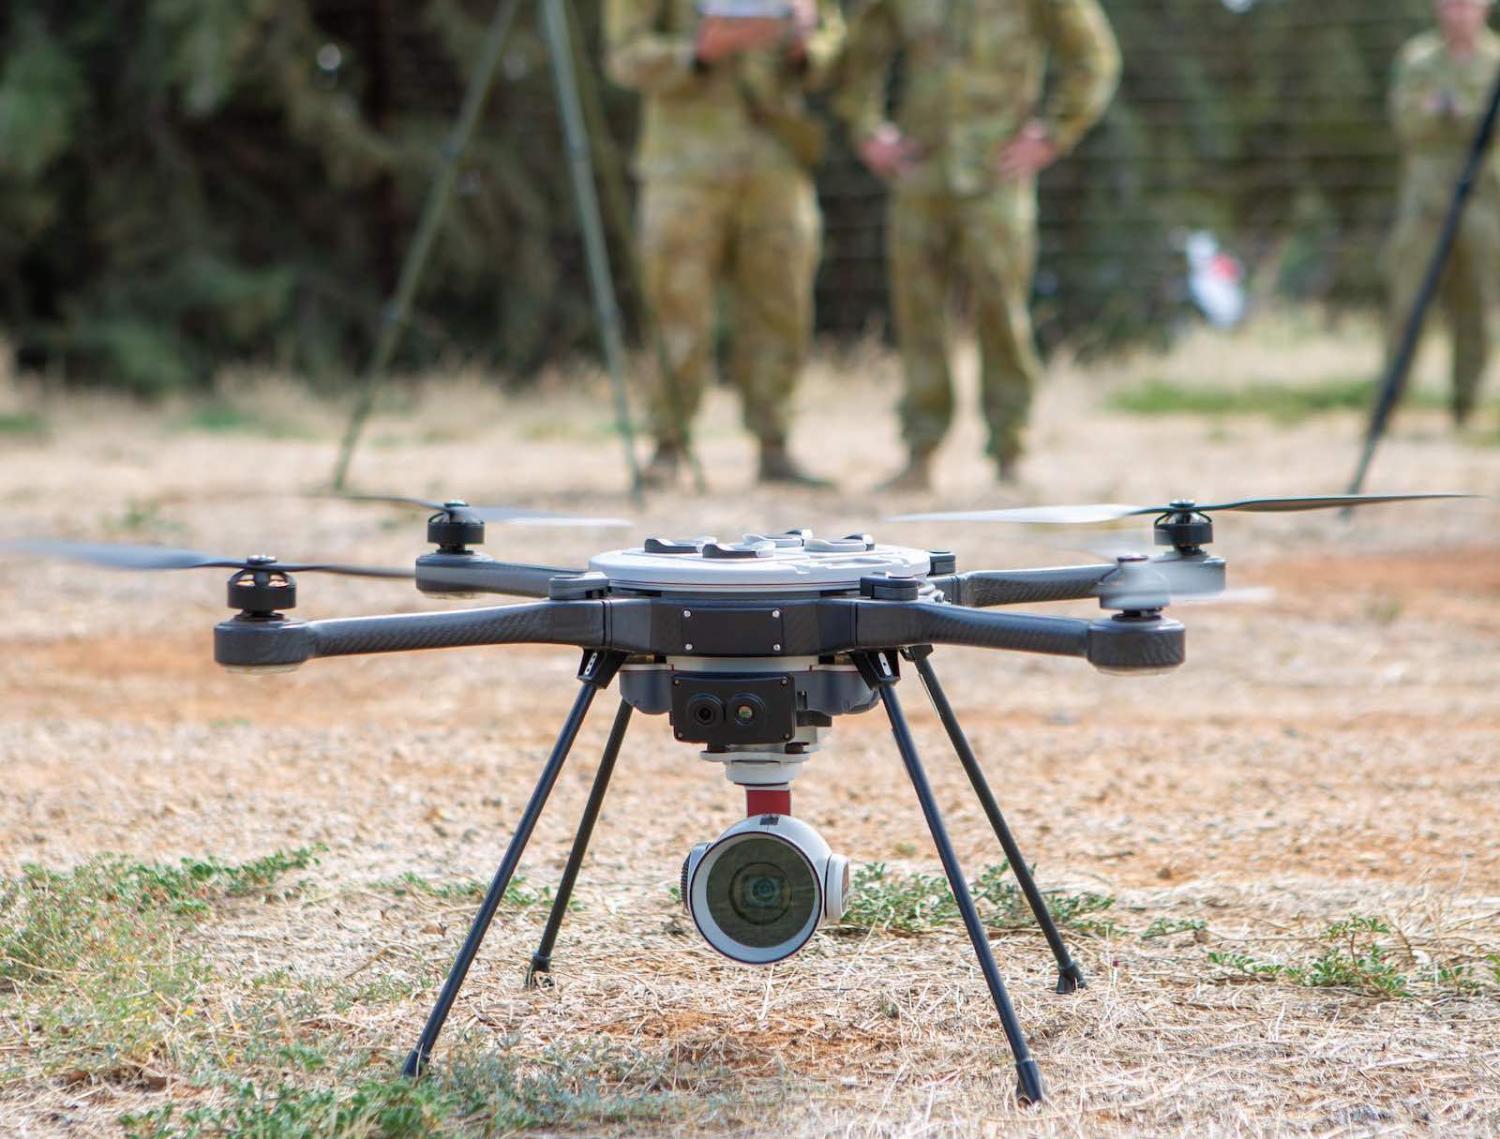 The Sky Ranger R70 drone (Defence Department)